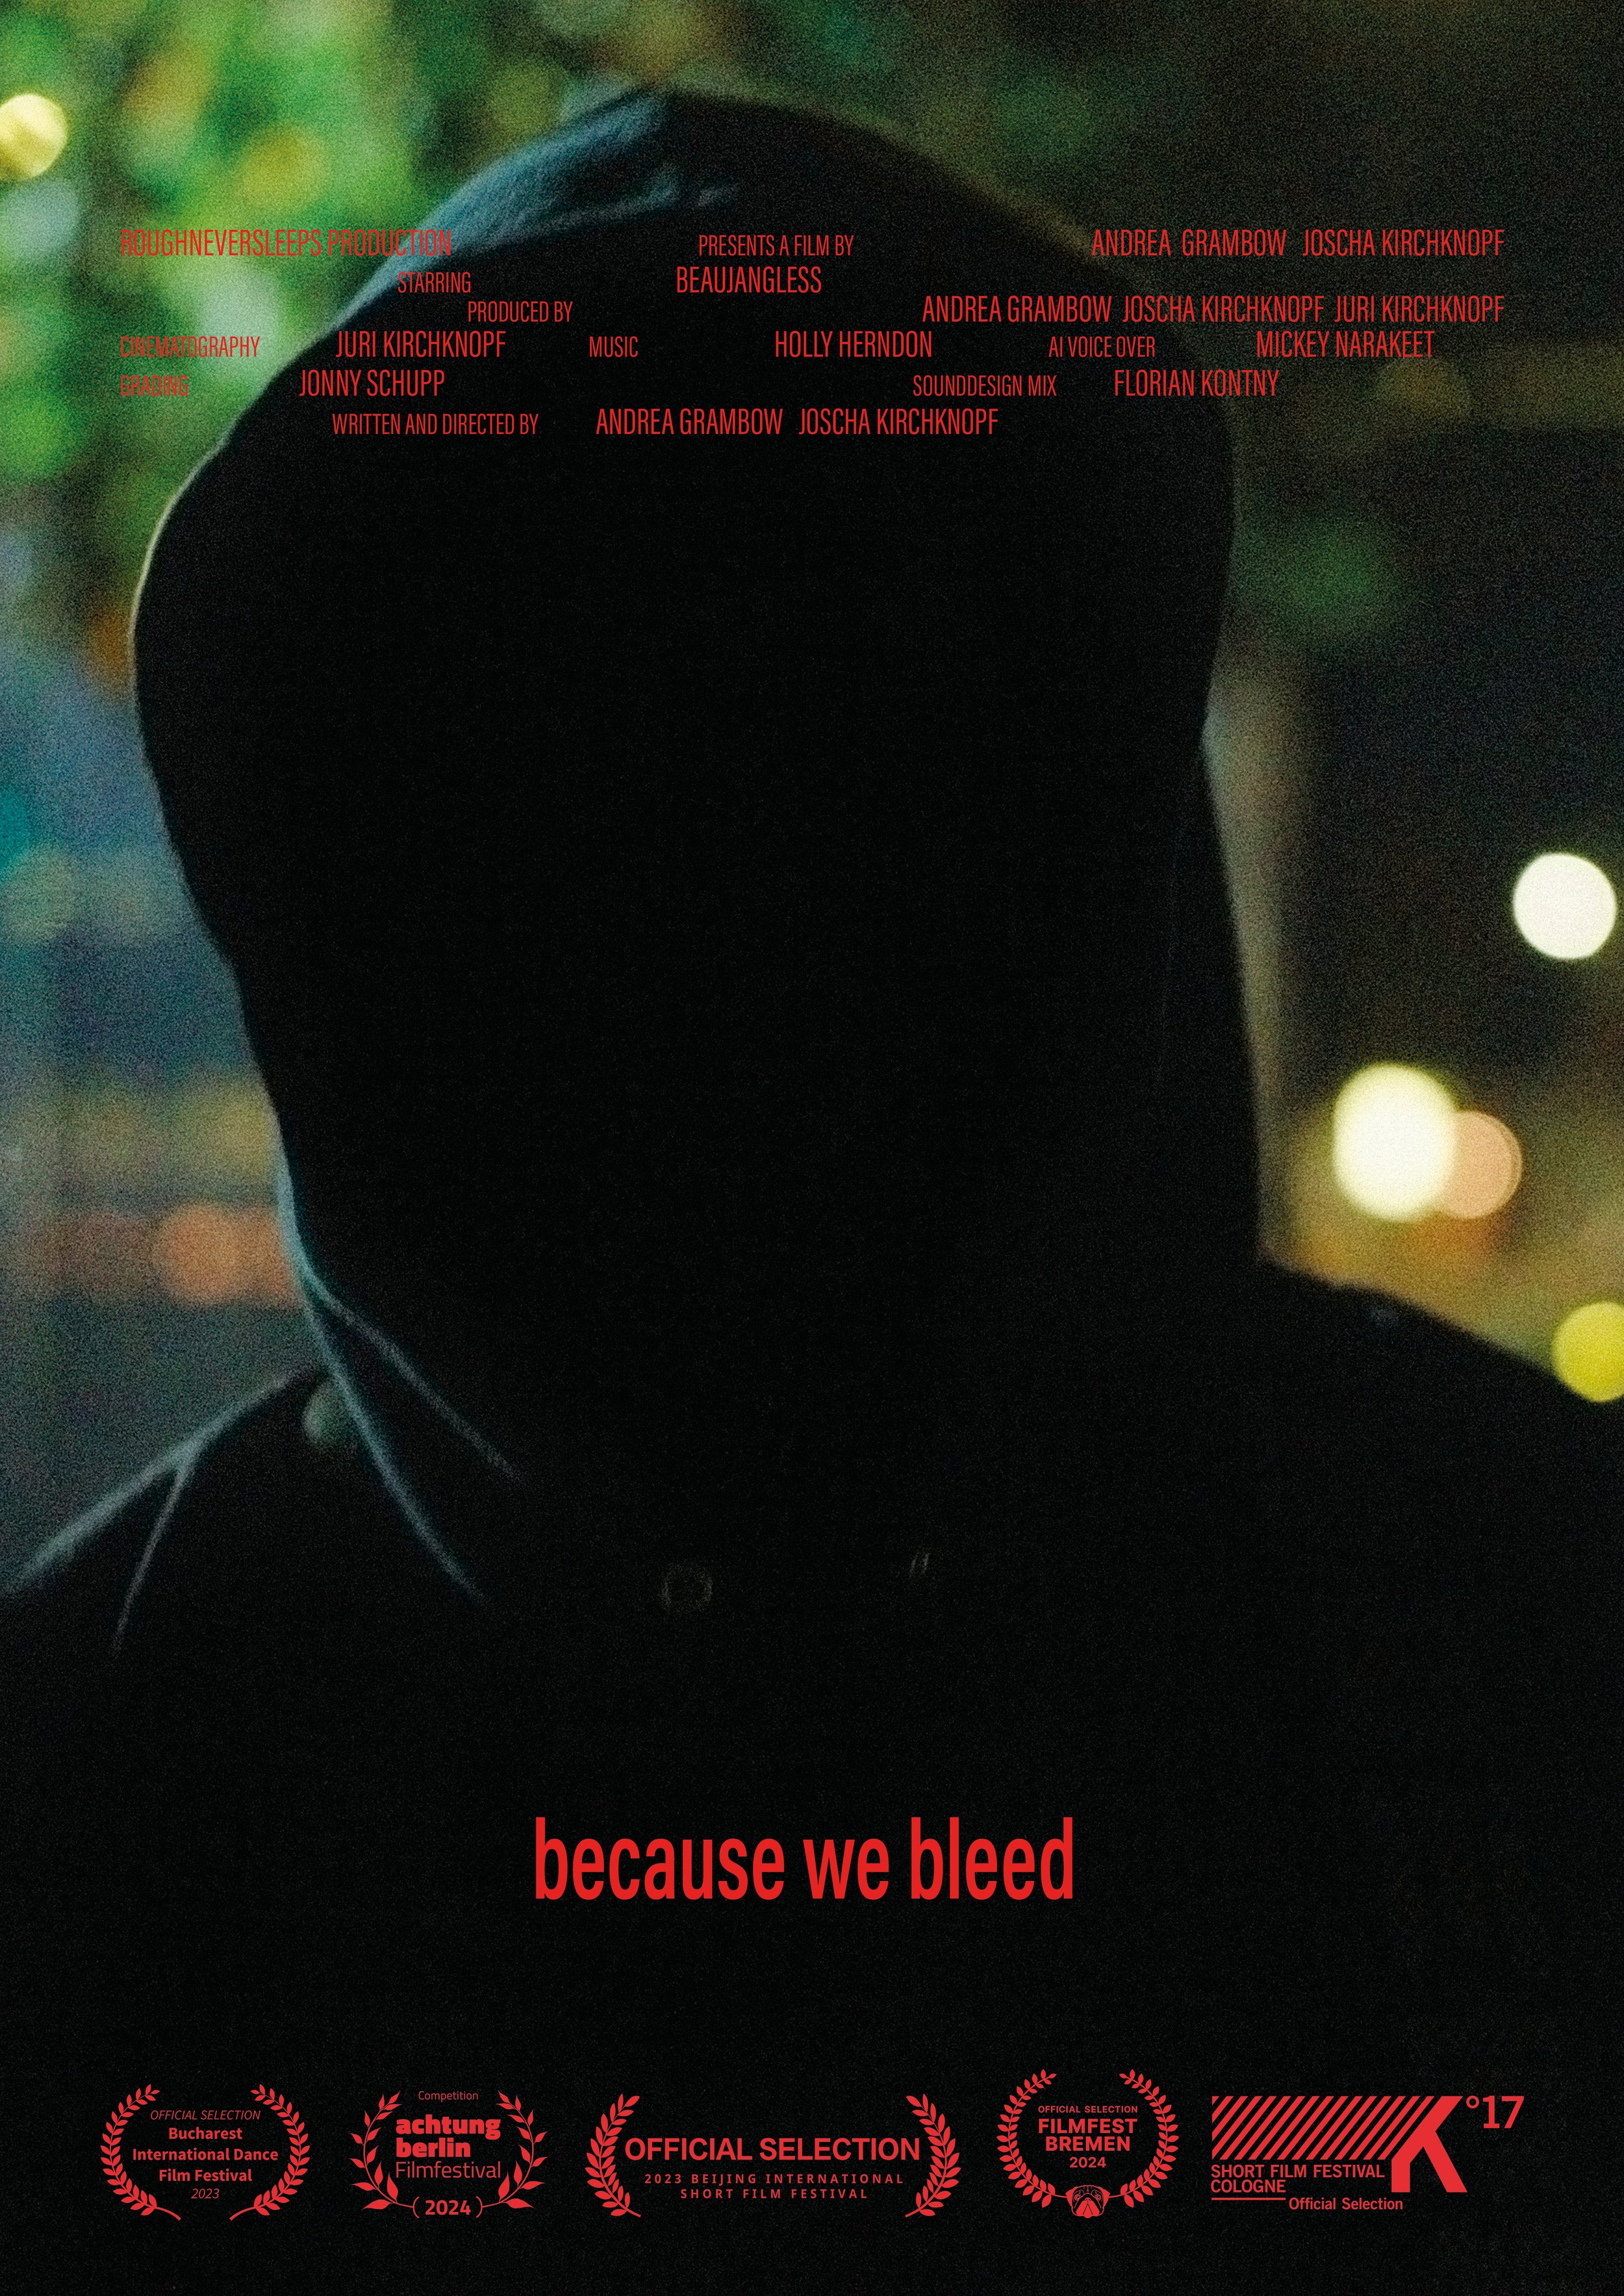  Because We Bleed                                                                                                                      2023 | 14min | color | eng  The film mixes the journey of a fictional character, an unknown entity played by drag p